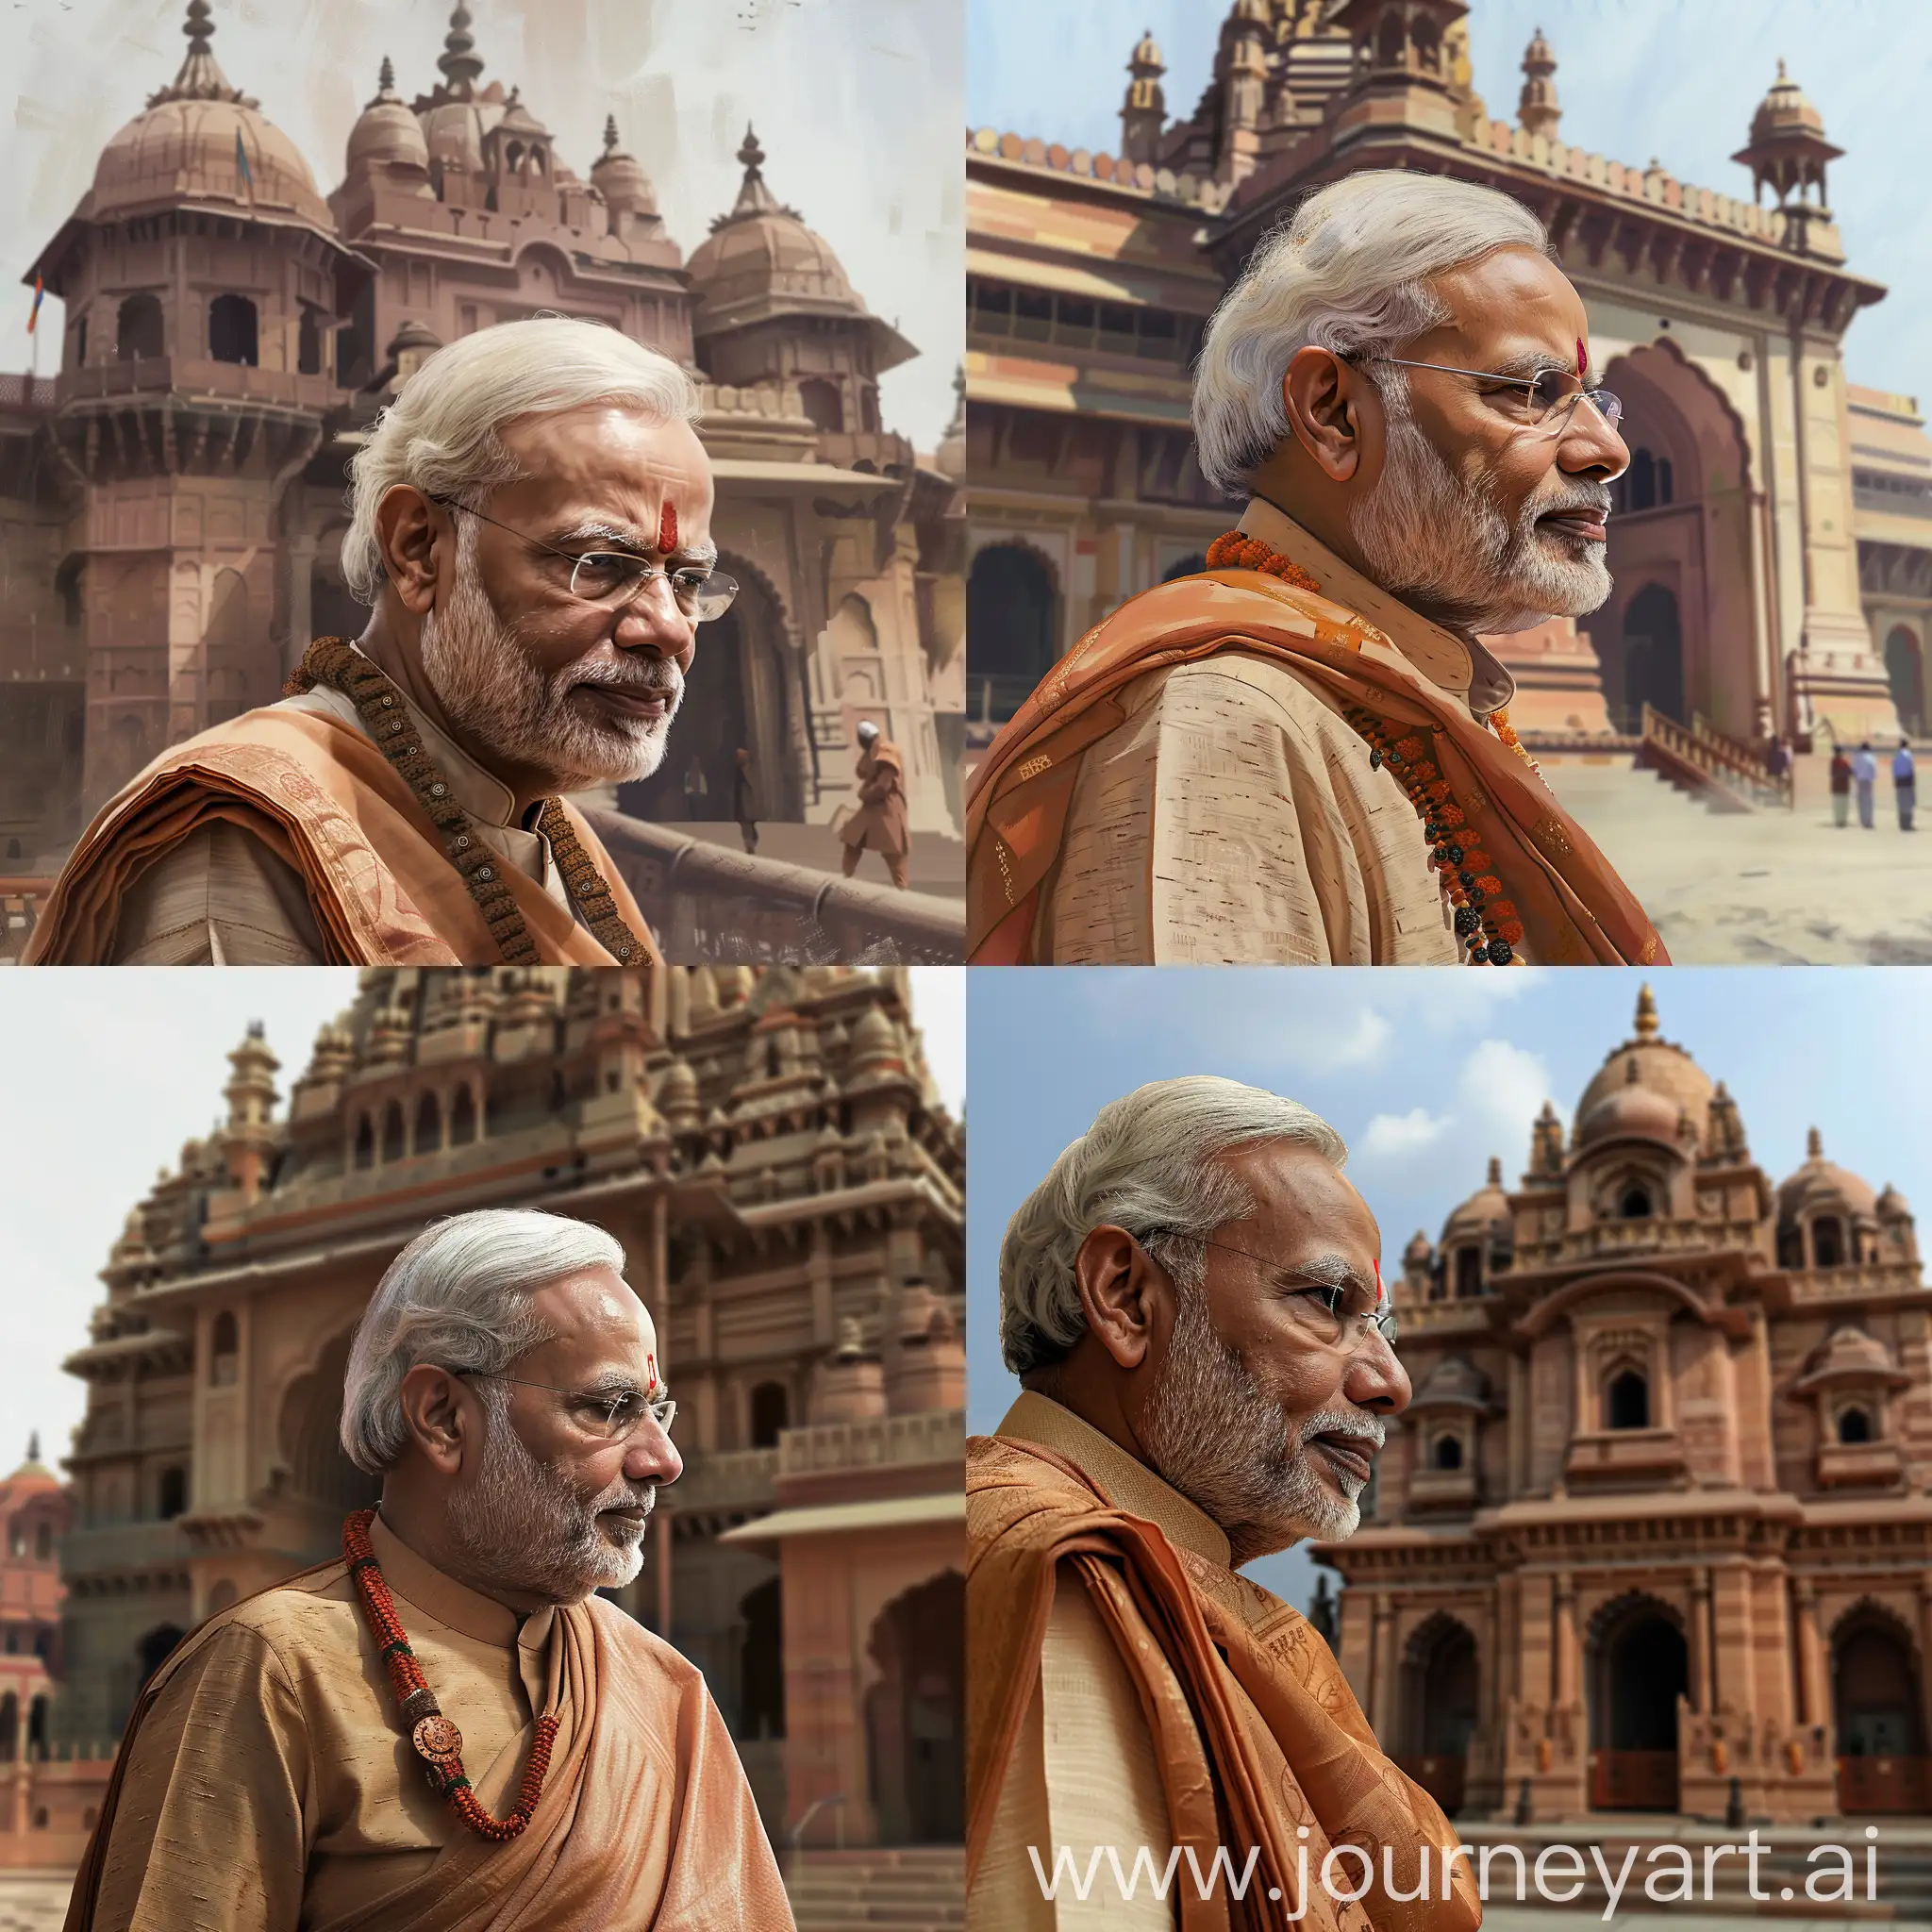 Please generate an image of fair-looking PM Narendra Modi in simple Hindu attire like a dhoti and kurta with Rudraksha in front of Ayodhya Ram temple. There must be a small smirk on his face. The head and body must be proportional. Provide a closeup side profile where he is doing Namaste.